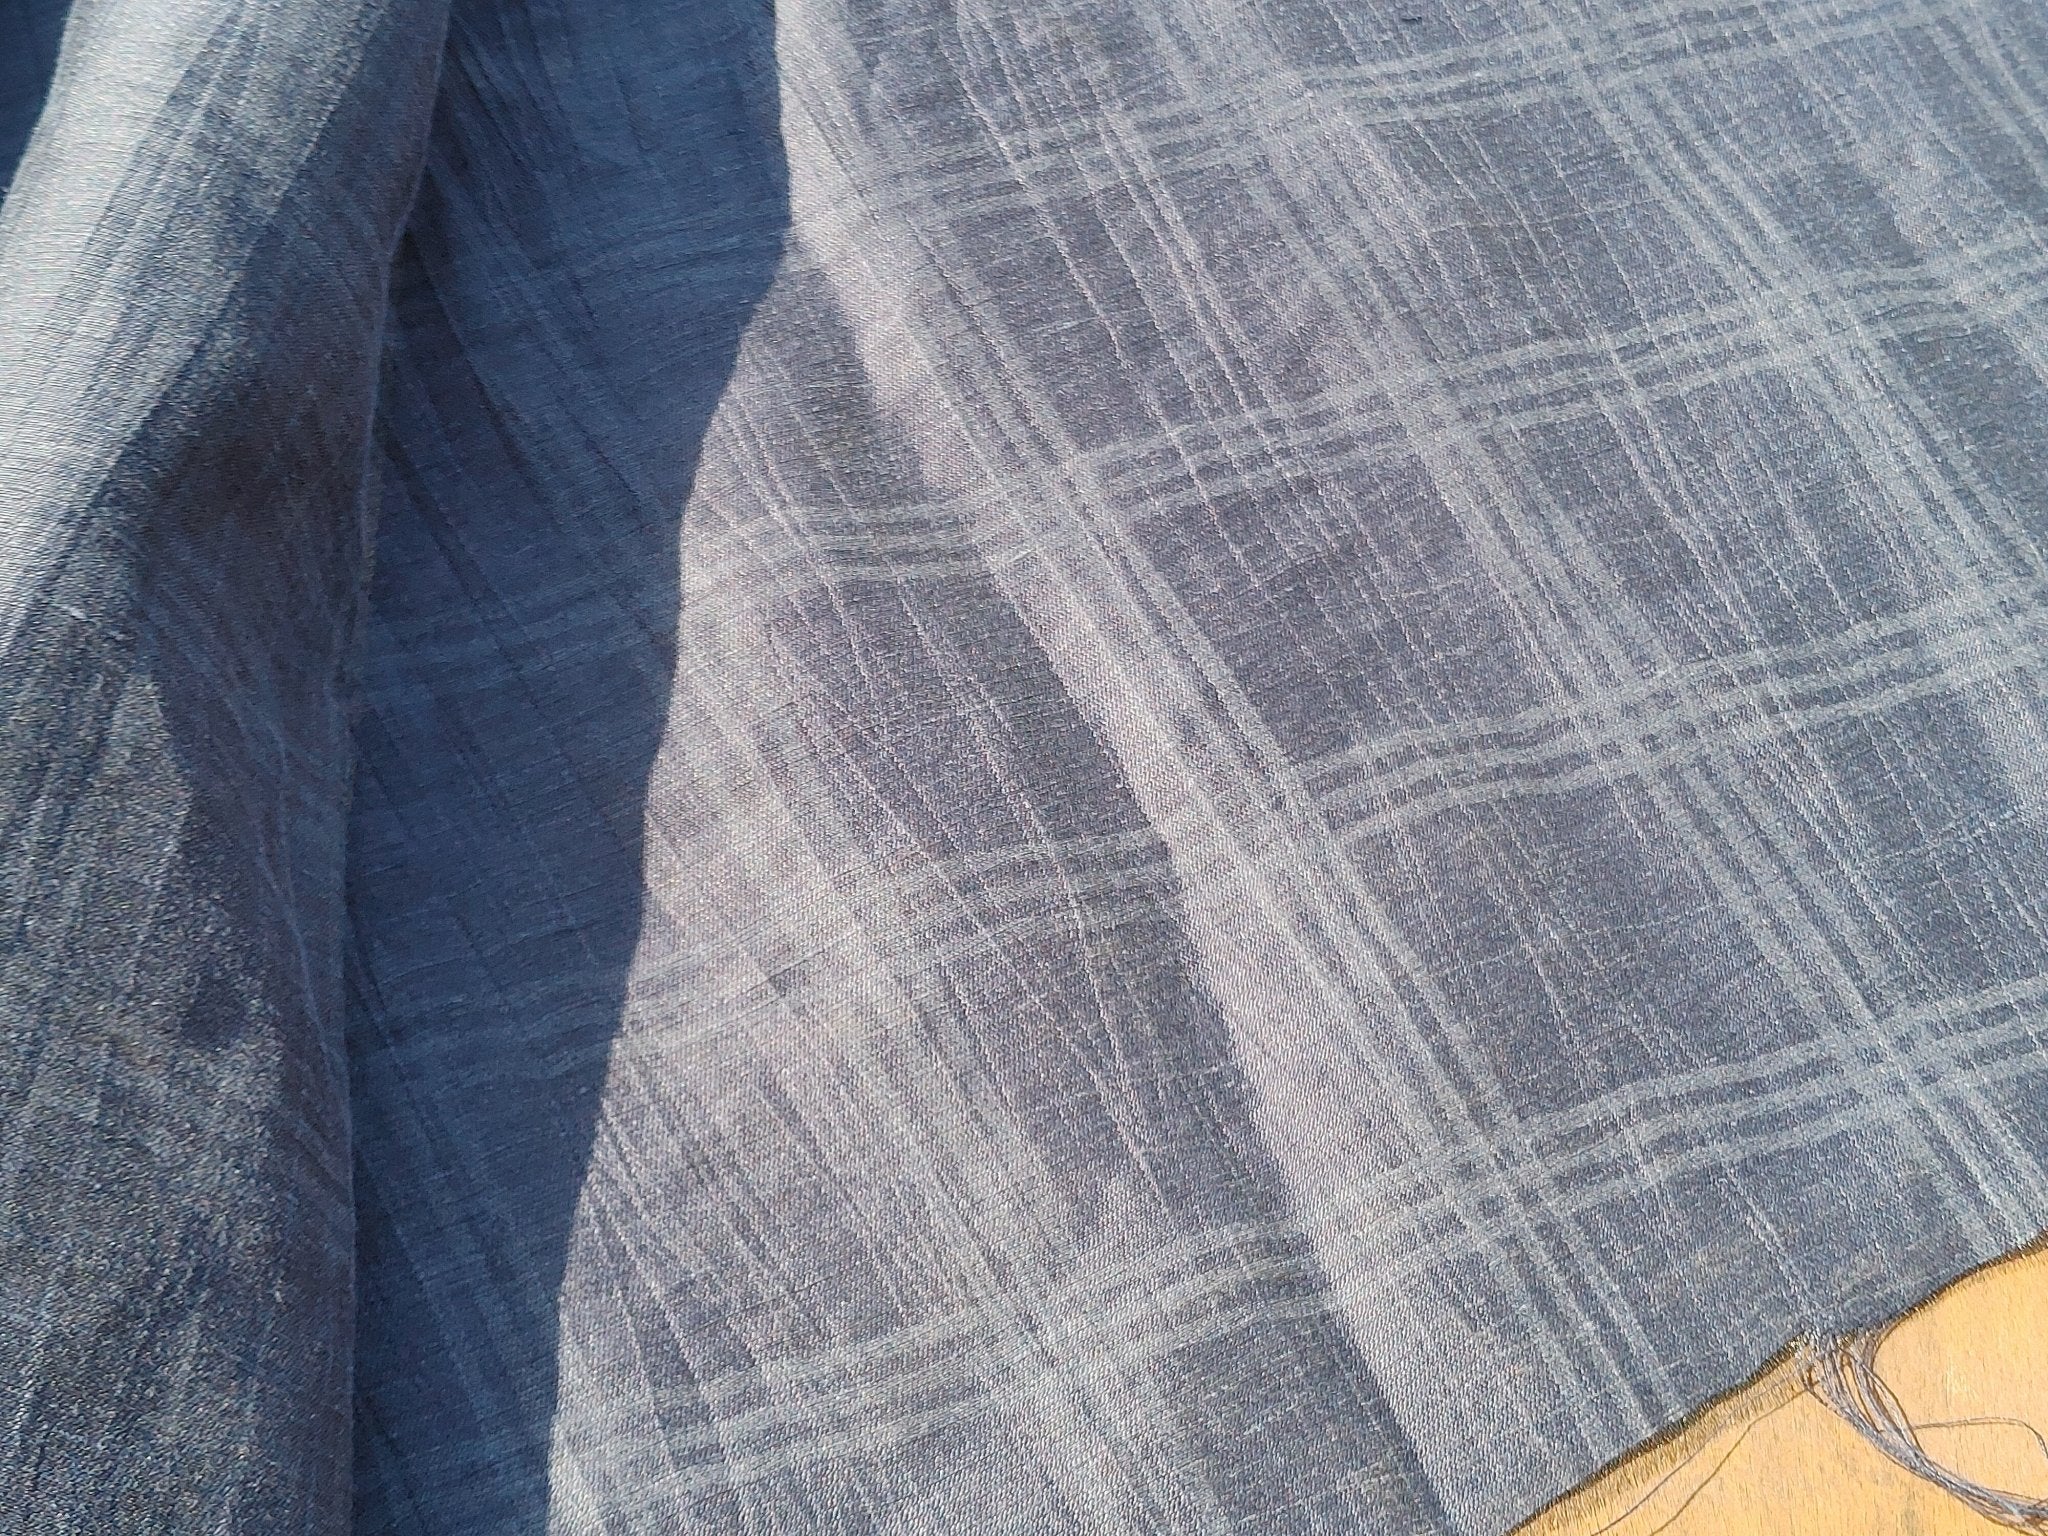 Naval Linen Polyester Fabric with Crease Effect and Printed Plaid Pattern 3578 - The Linen Lab - Navy